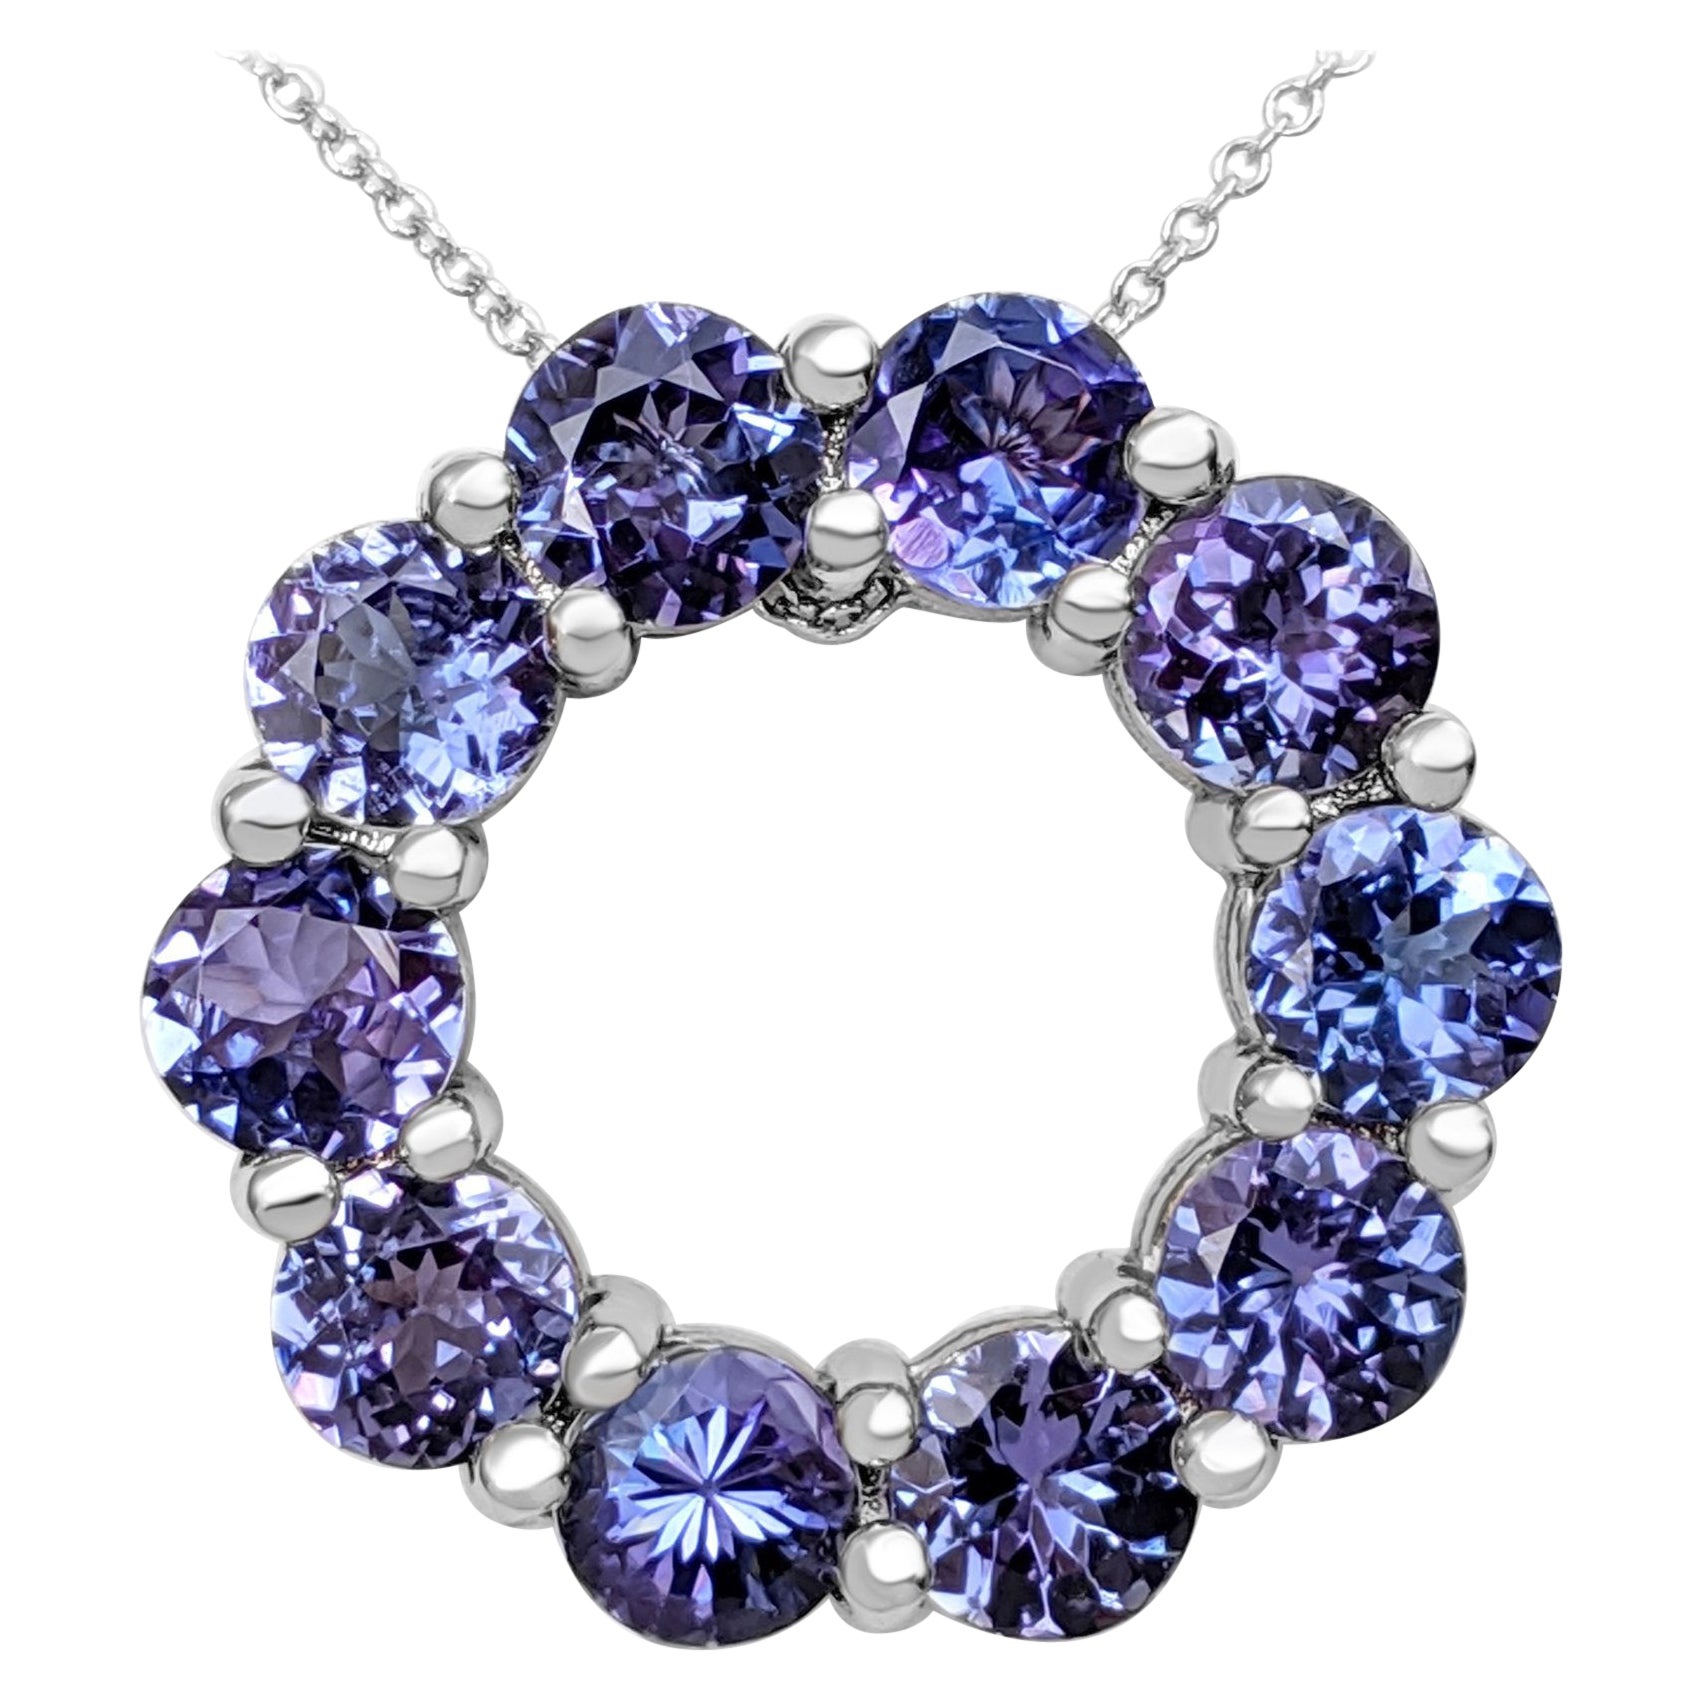 $1 NO RESERVE!   5.23cttw Tanzanite, 14K White Gold Necklace With Pendant